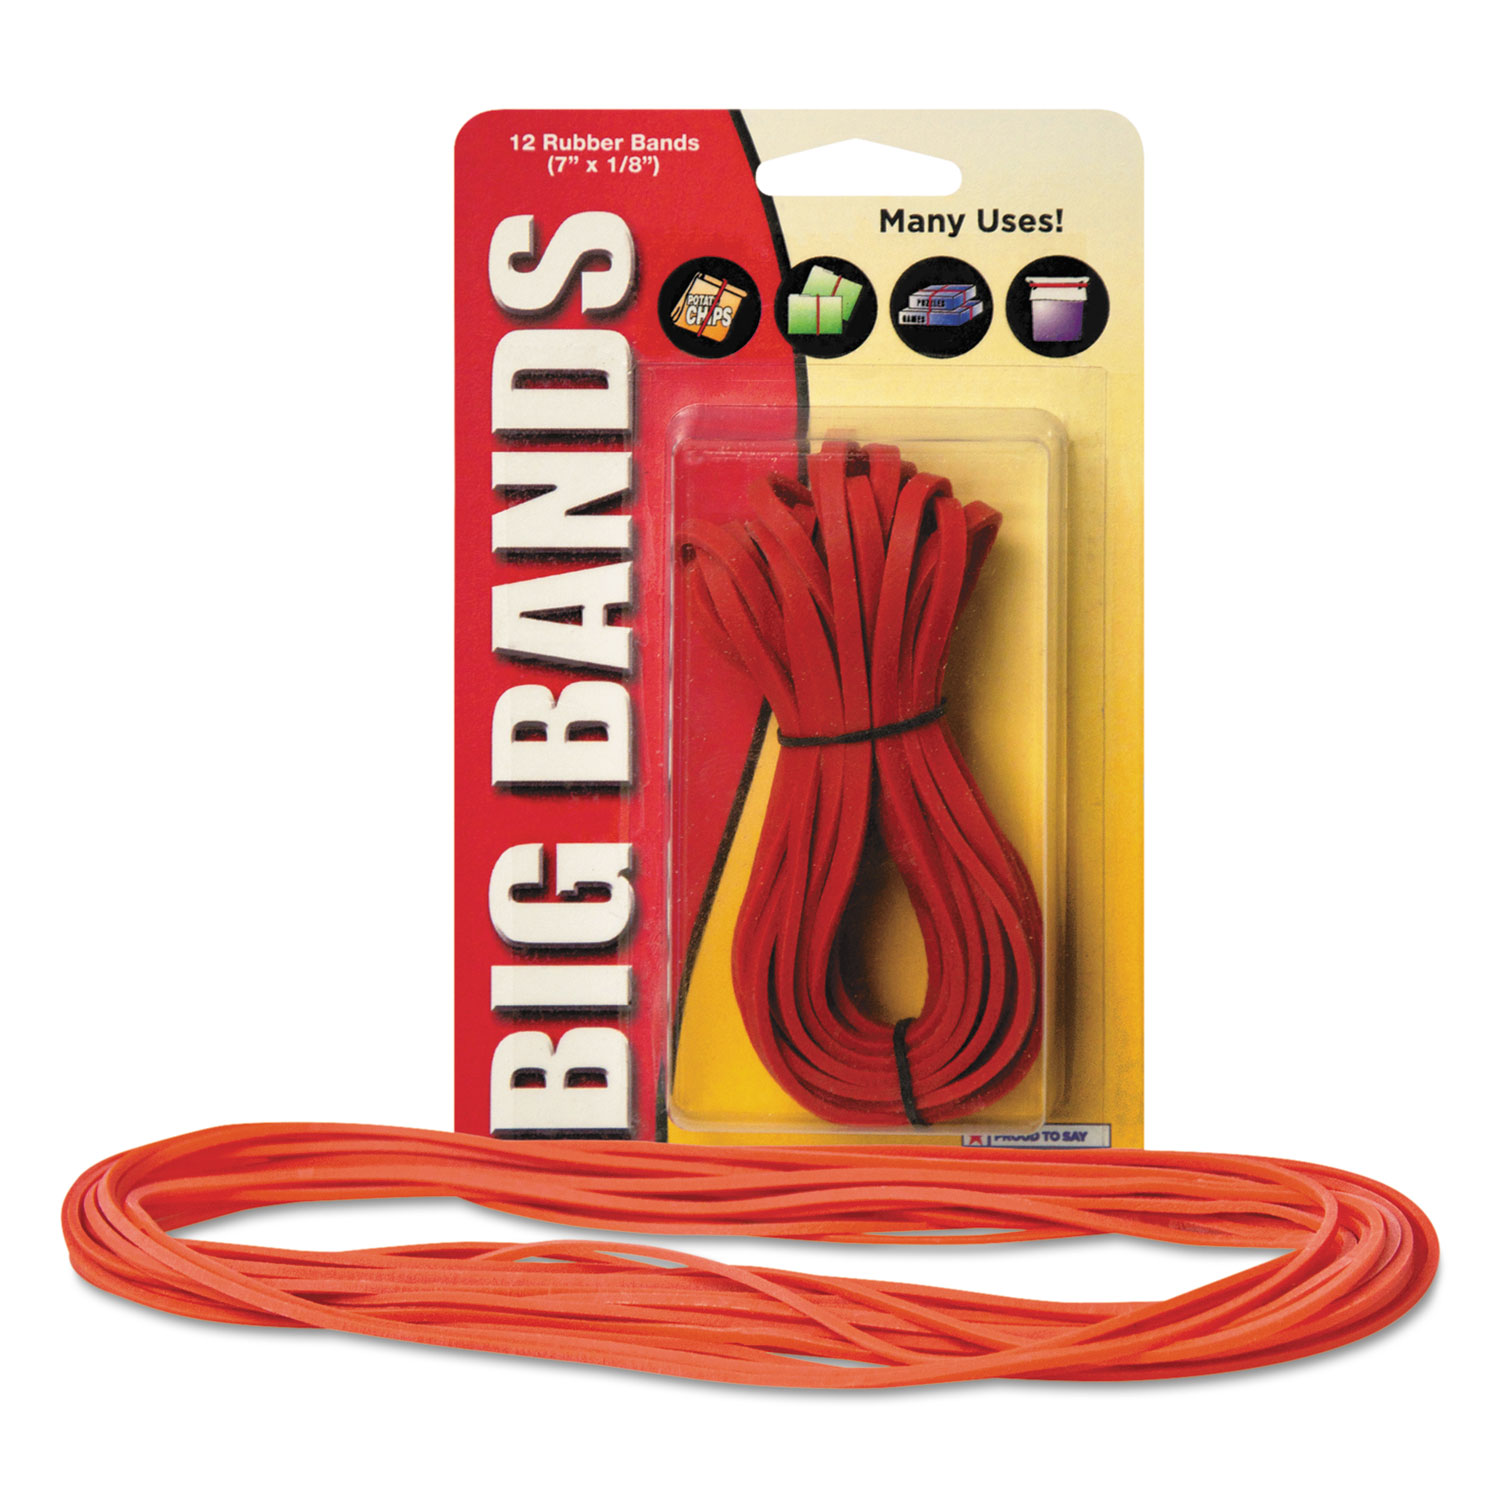 Big Bands Rubber Bands, 7 x 1/8, Red, 12/Pack